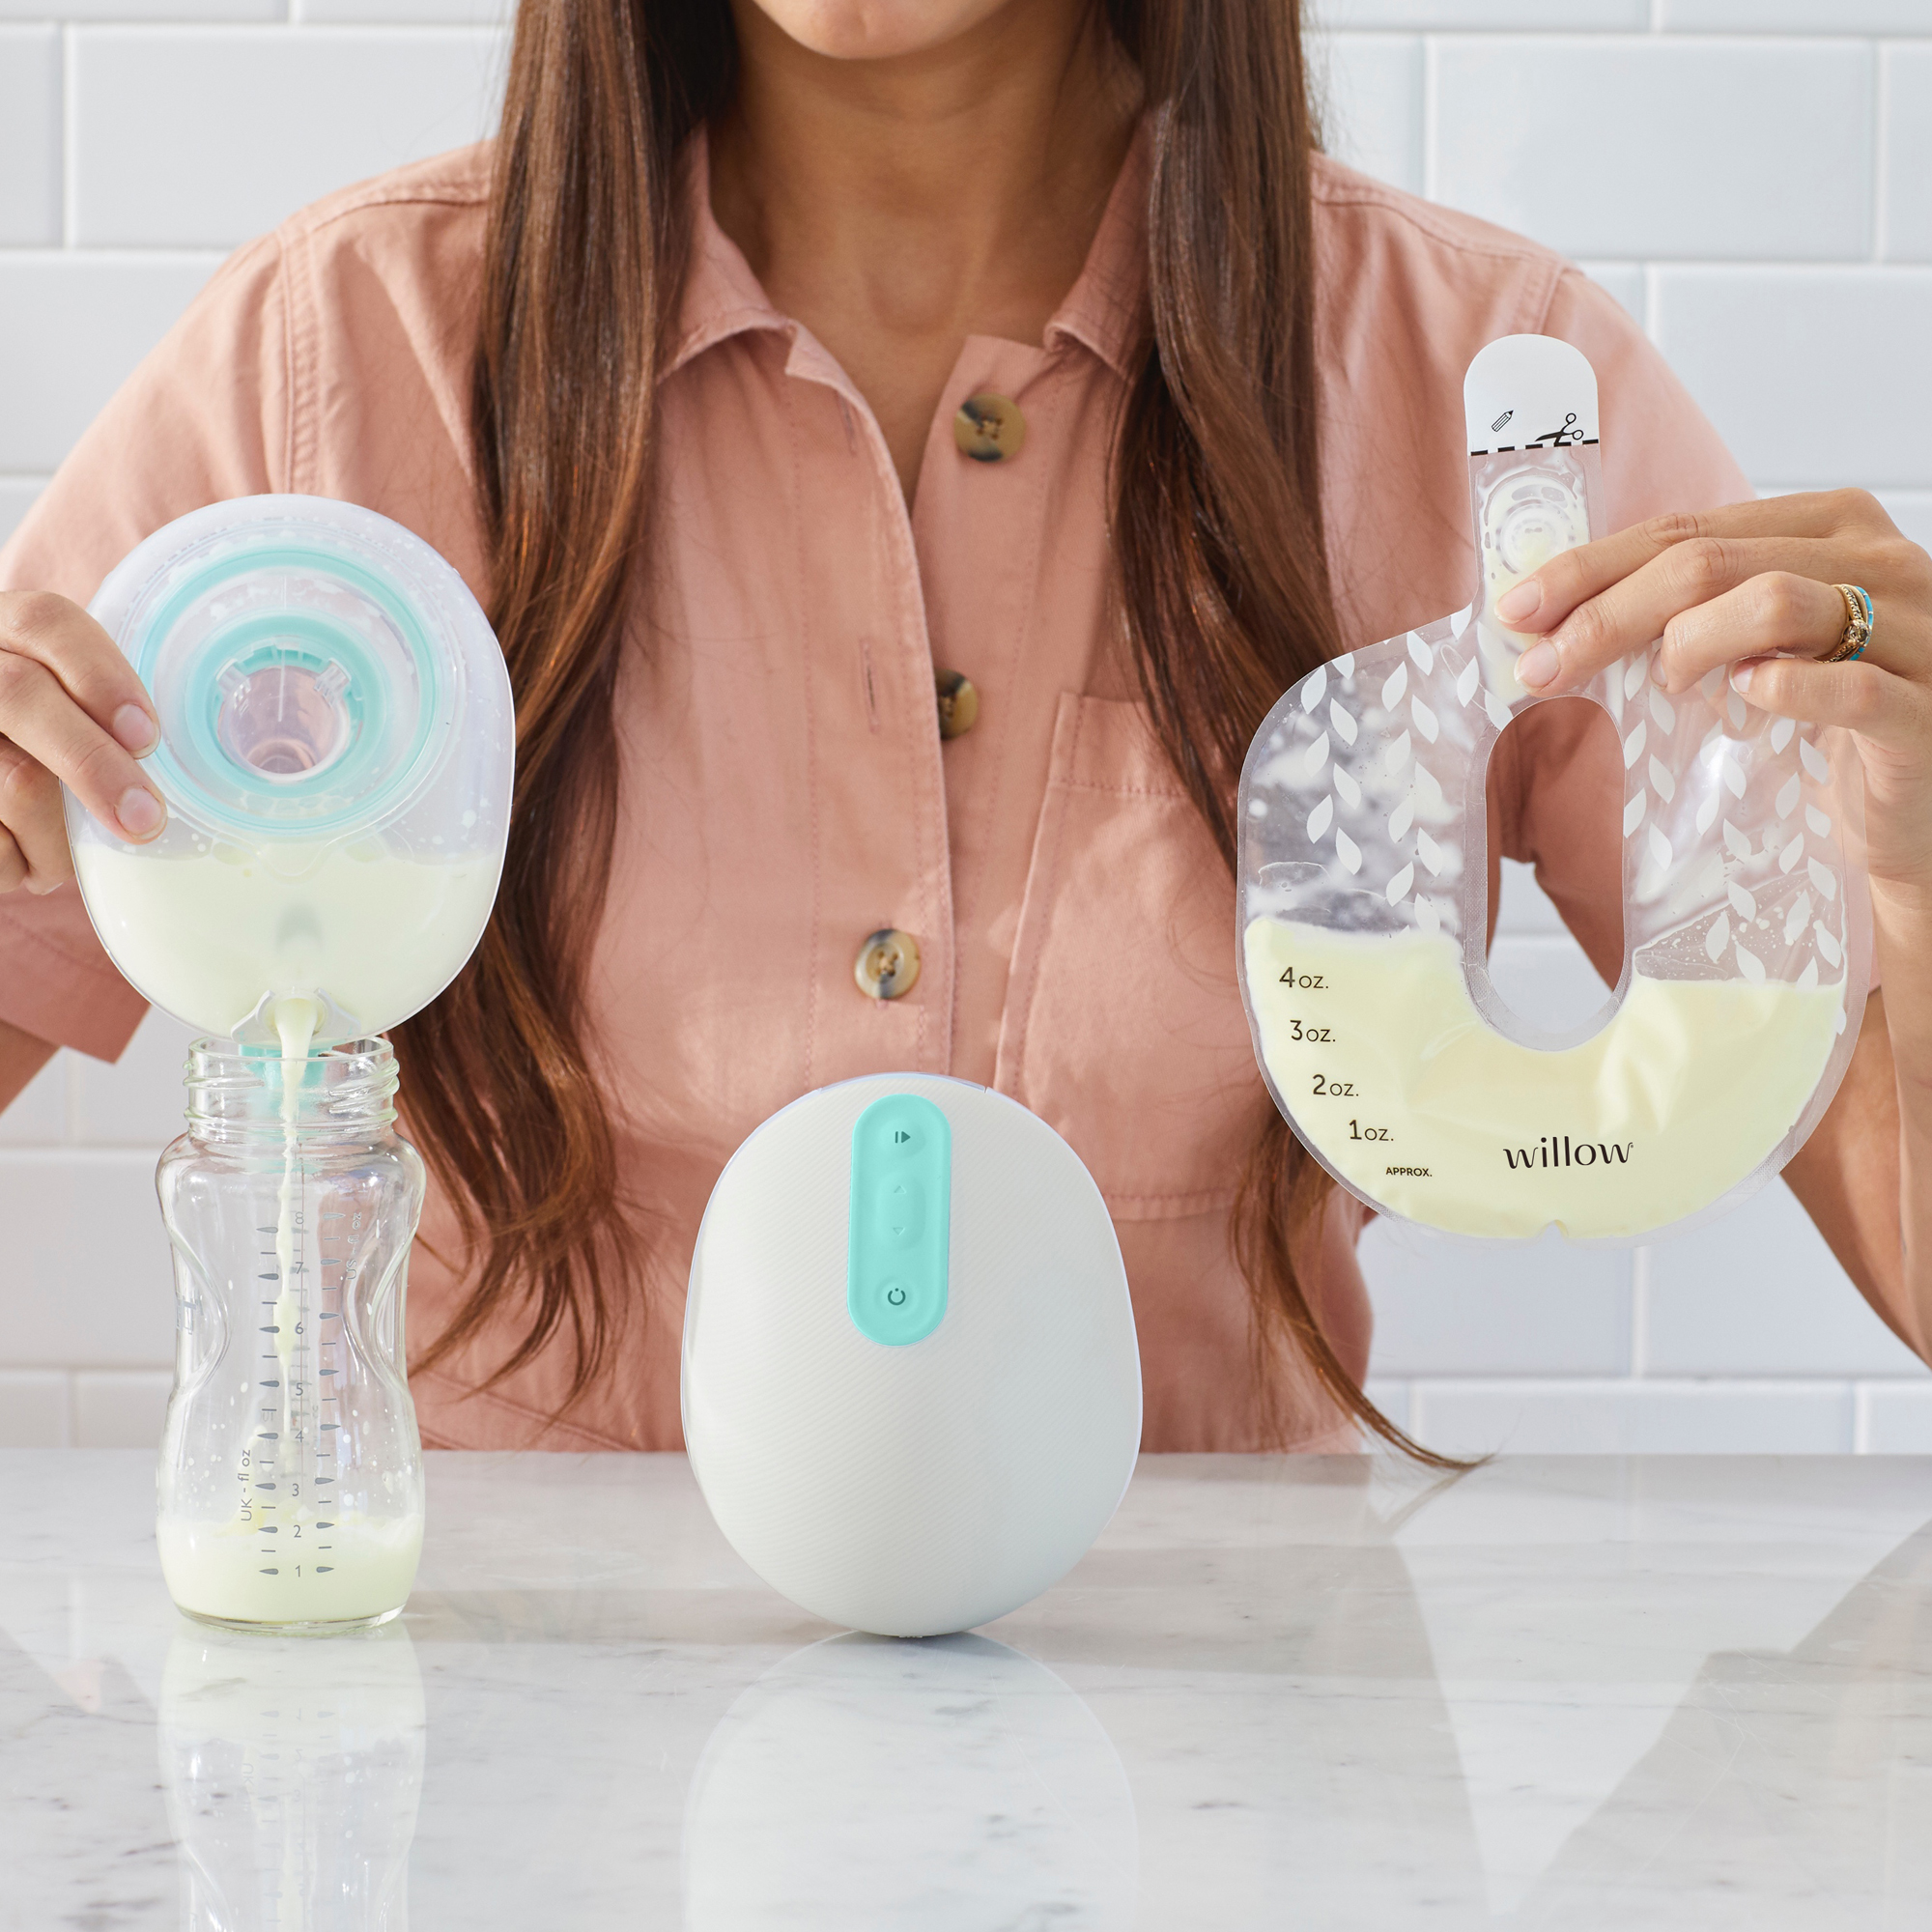 Willow® Generation 3 Wearable Double HandsFree Electric Breast Pump